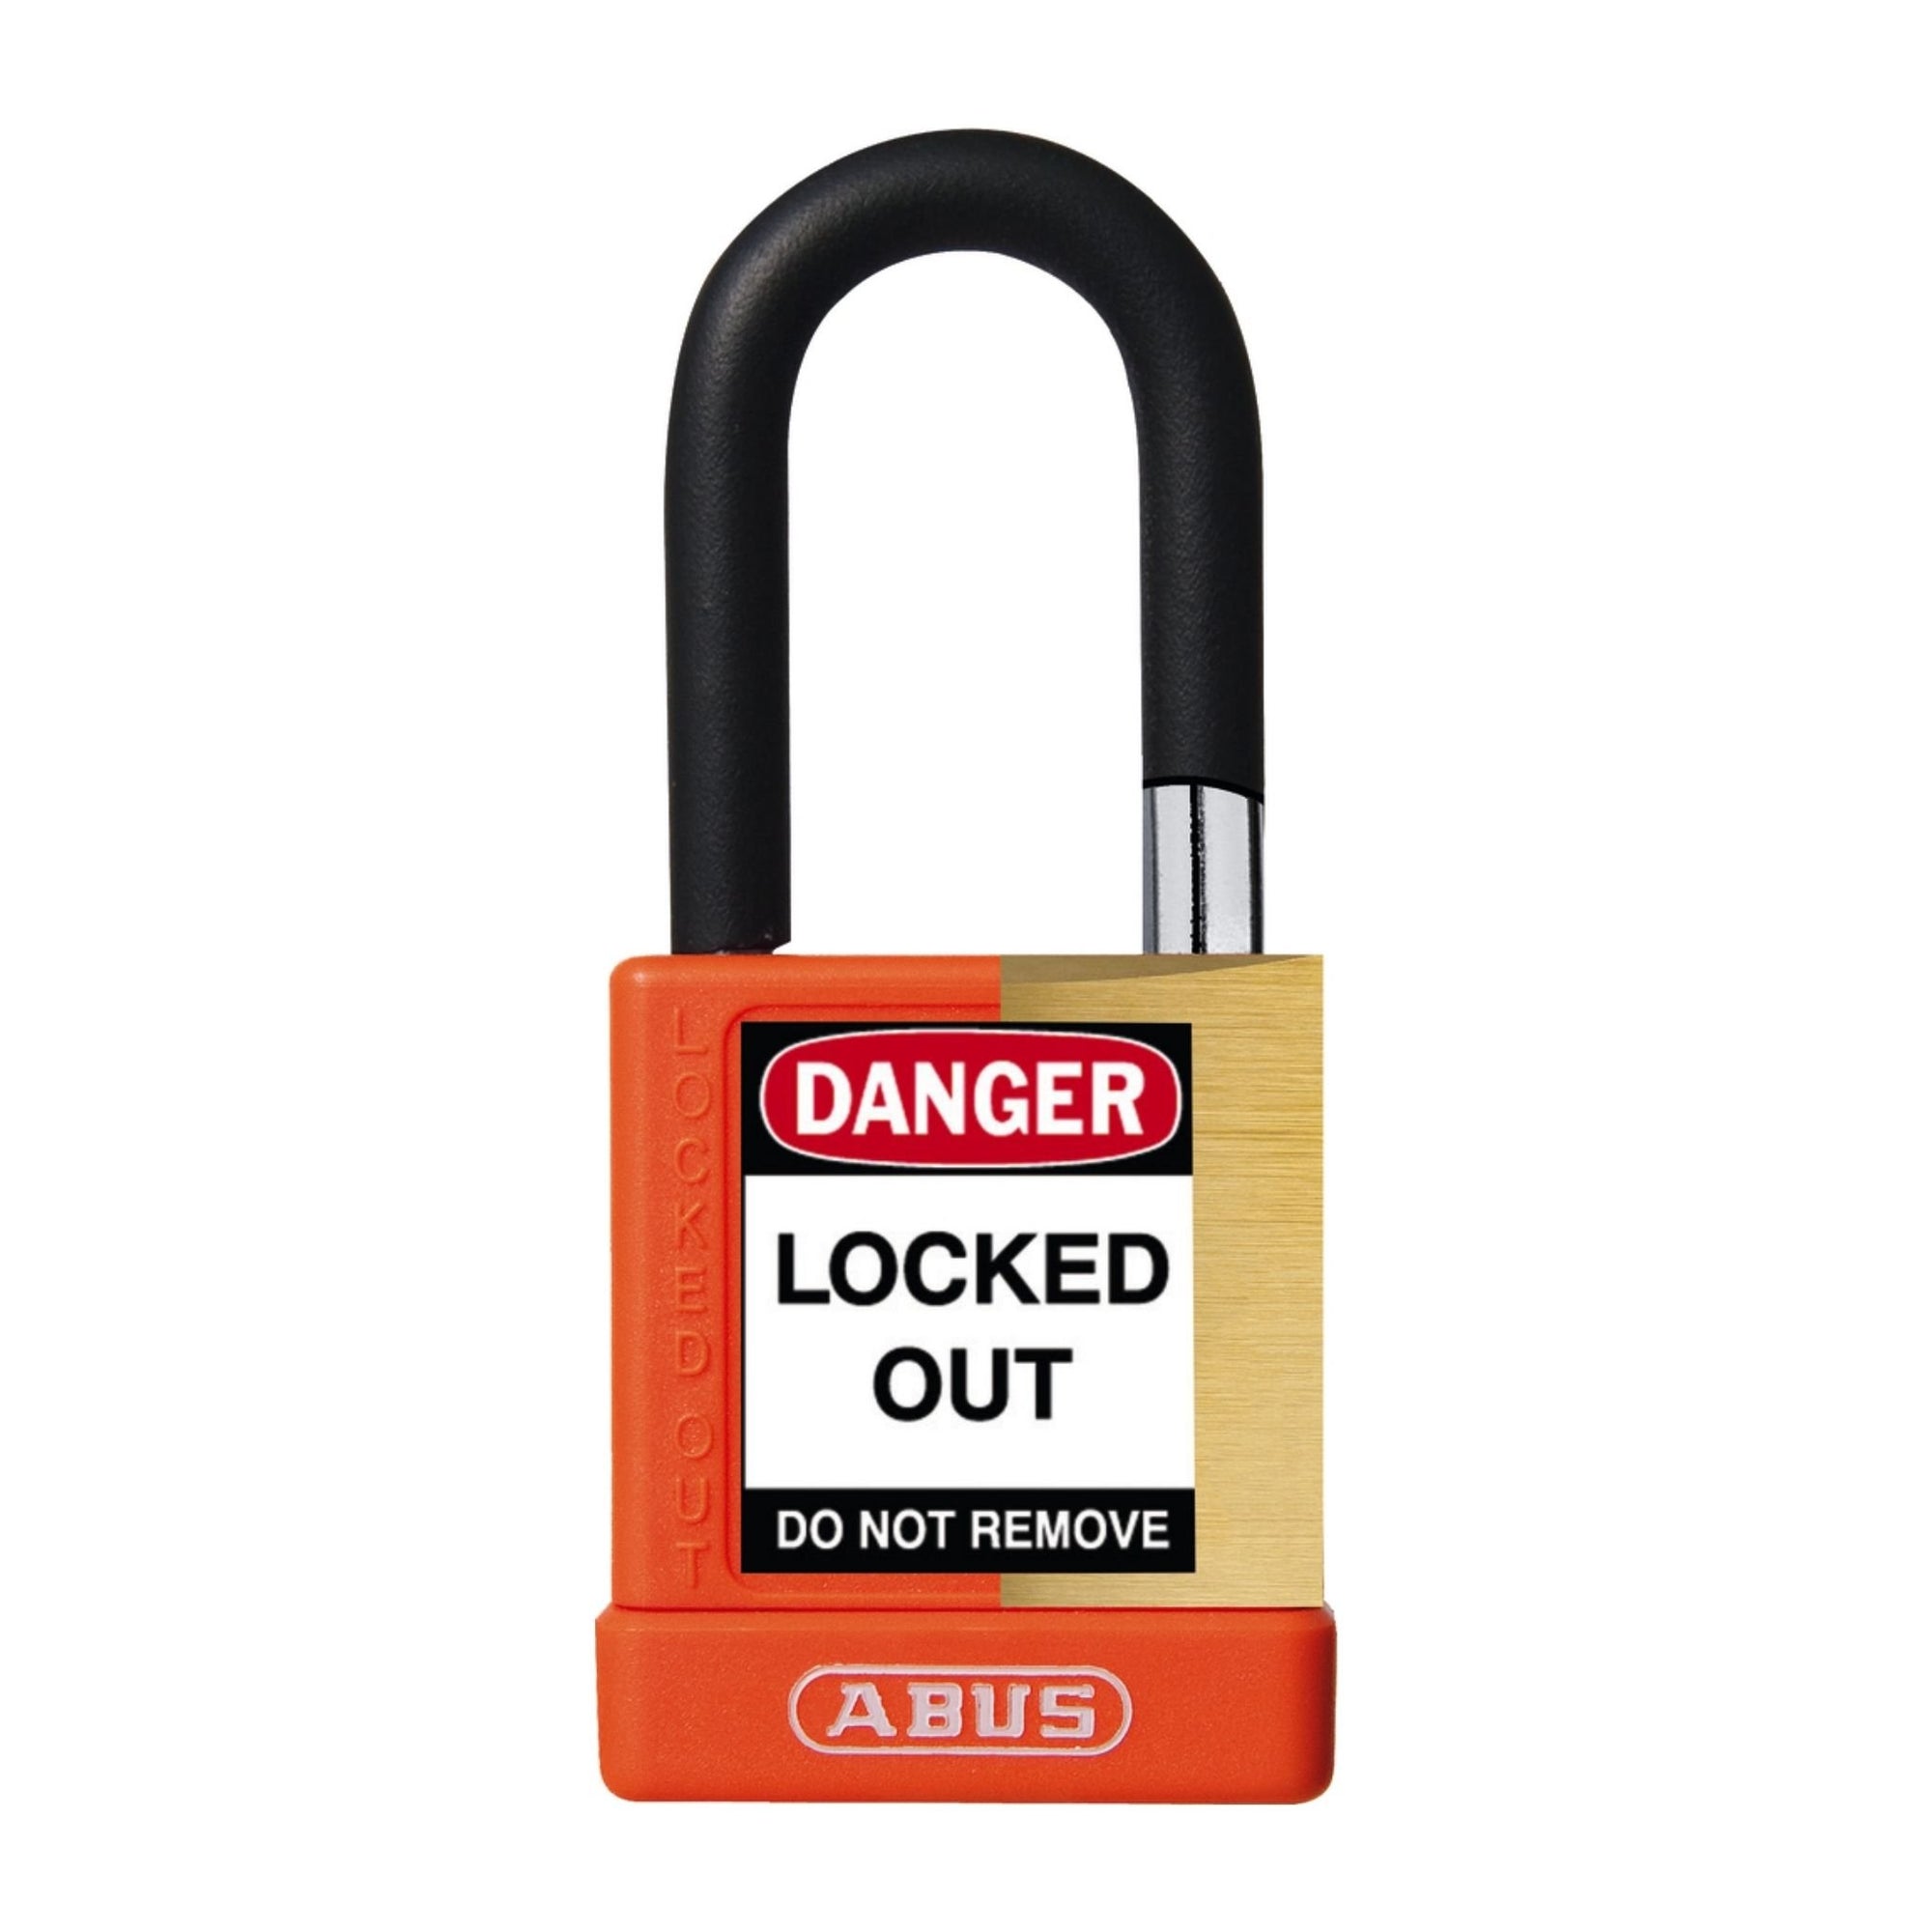 Abus 74M/40 MK Orange Insulated Brass Safety Padlock with 1-1/2" Shackle - The Lock Source